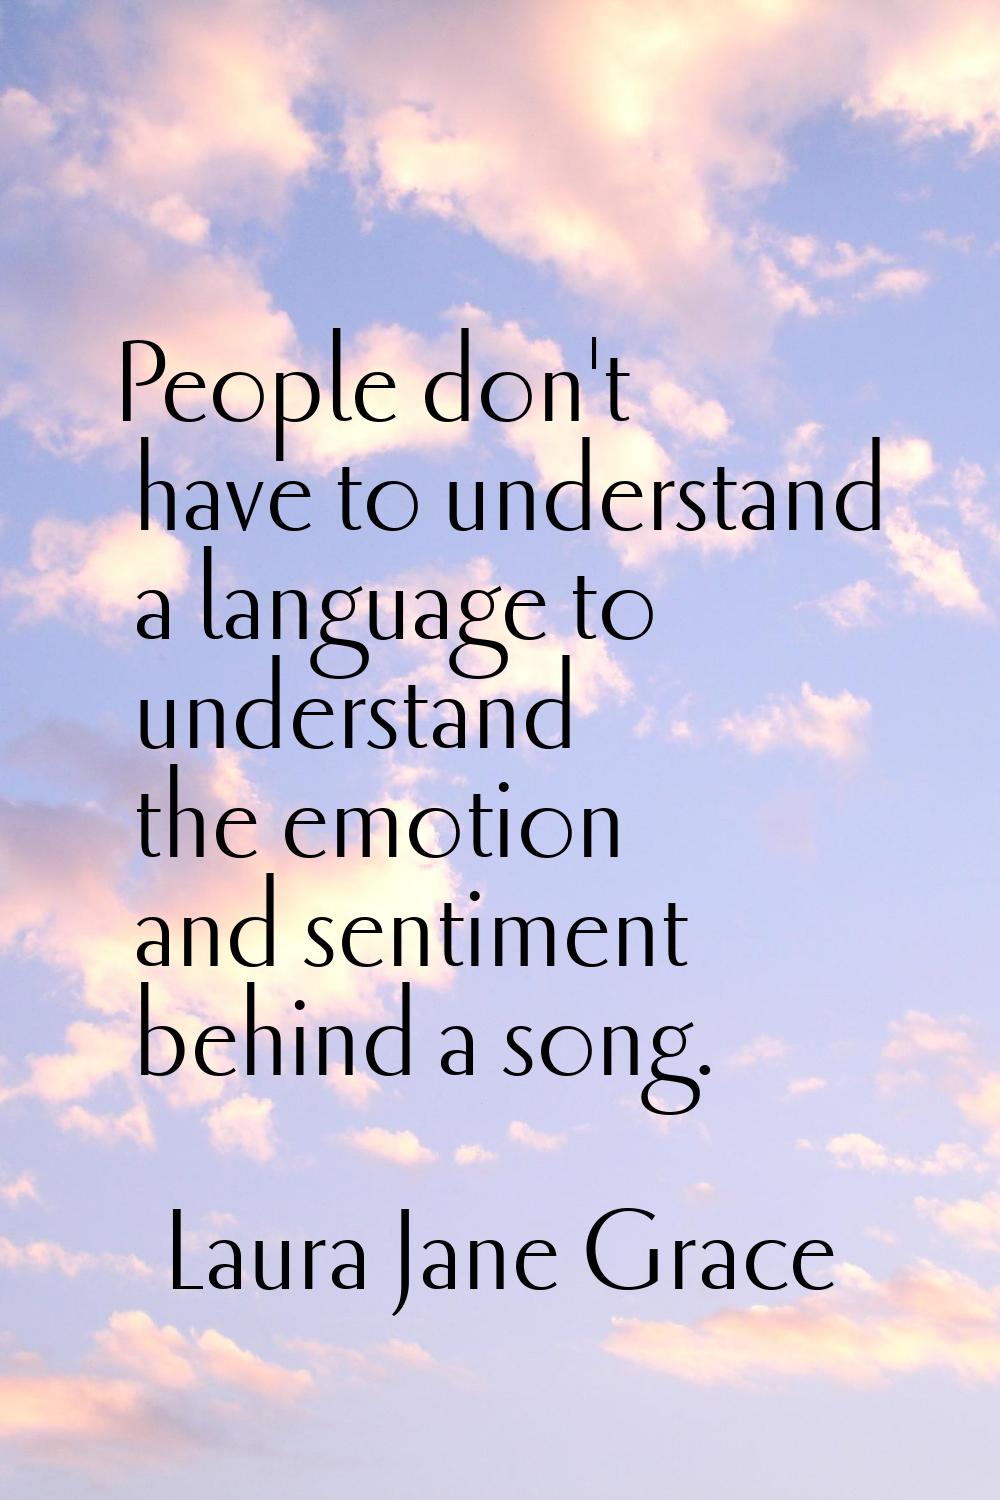 People don't have to understand a language to understand the emotion and sentiment behind a song.